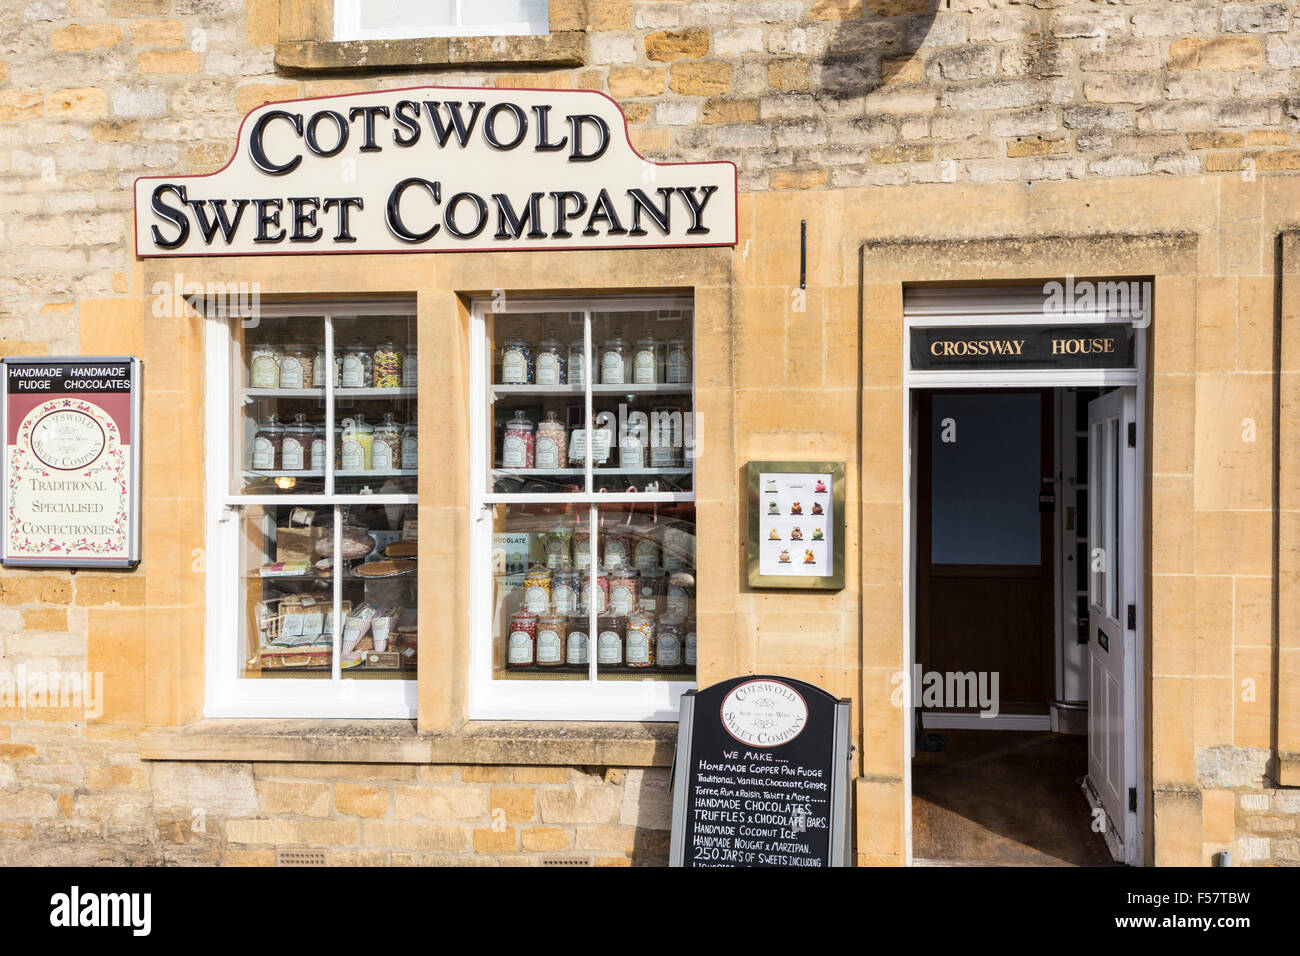 Traditional sweet shop in the Cotswold town of Stow on the Wold, Gloucestershire, England, UK Stock Photo